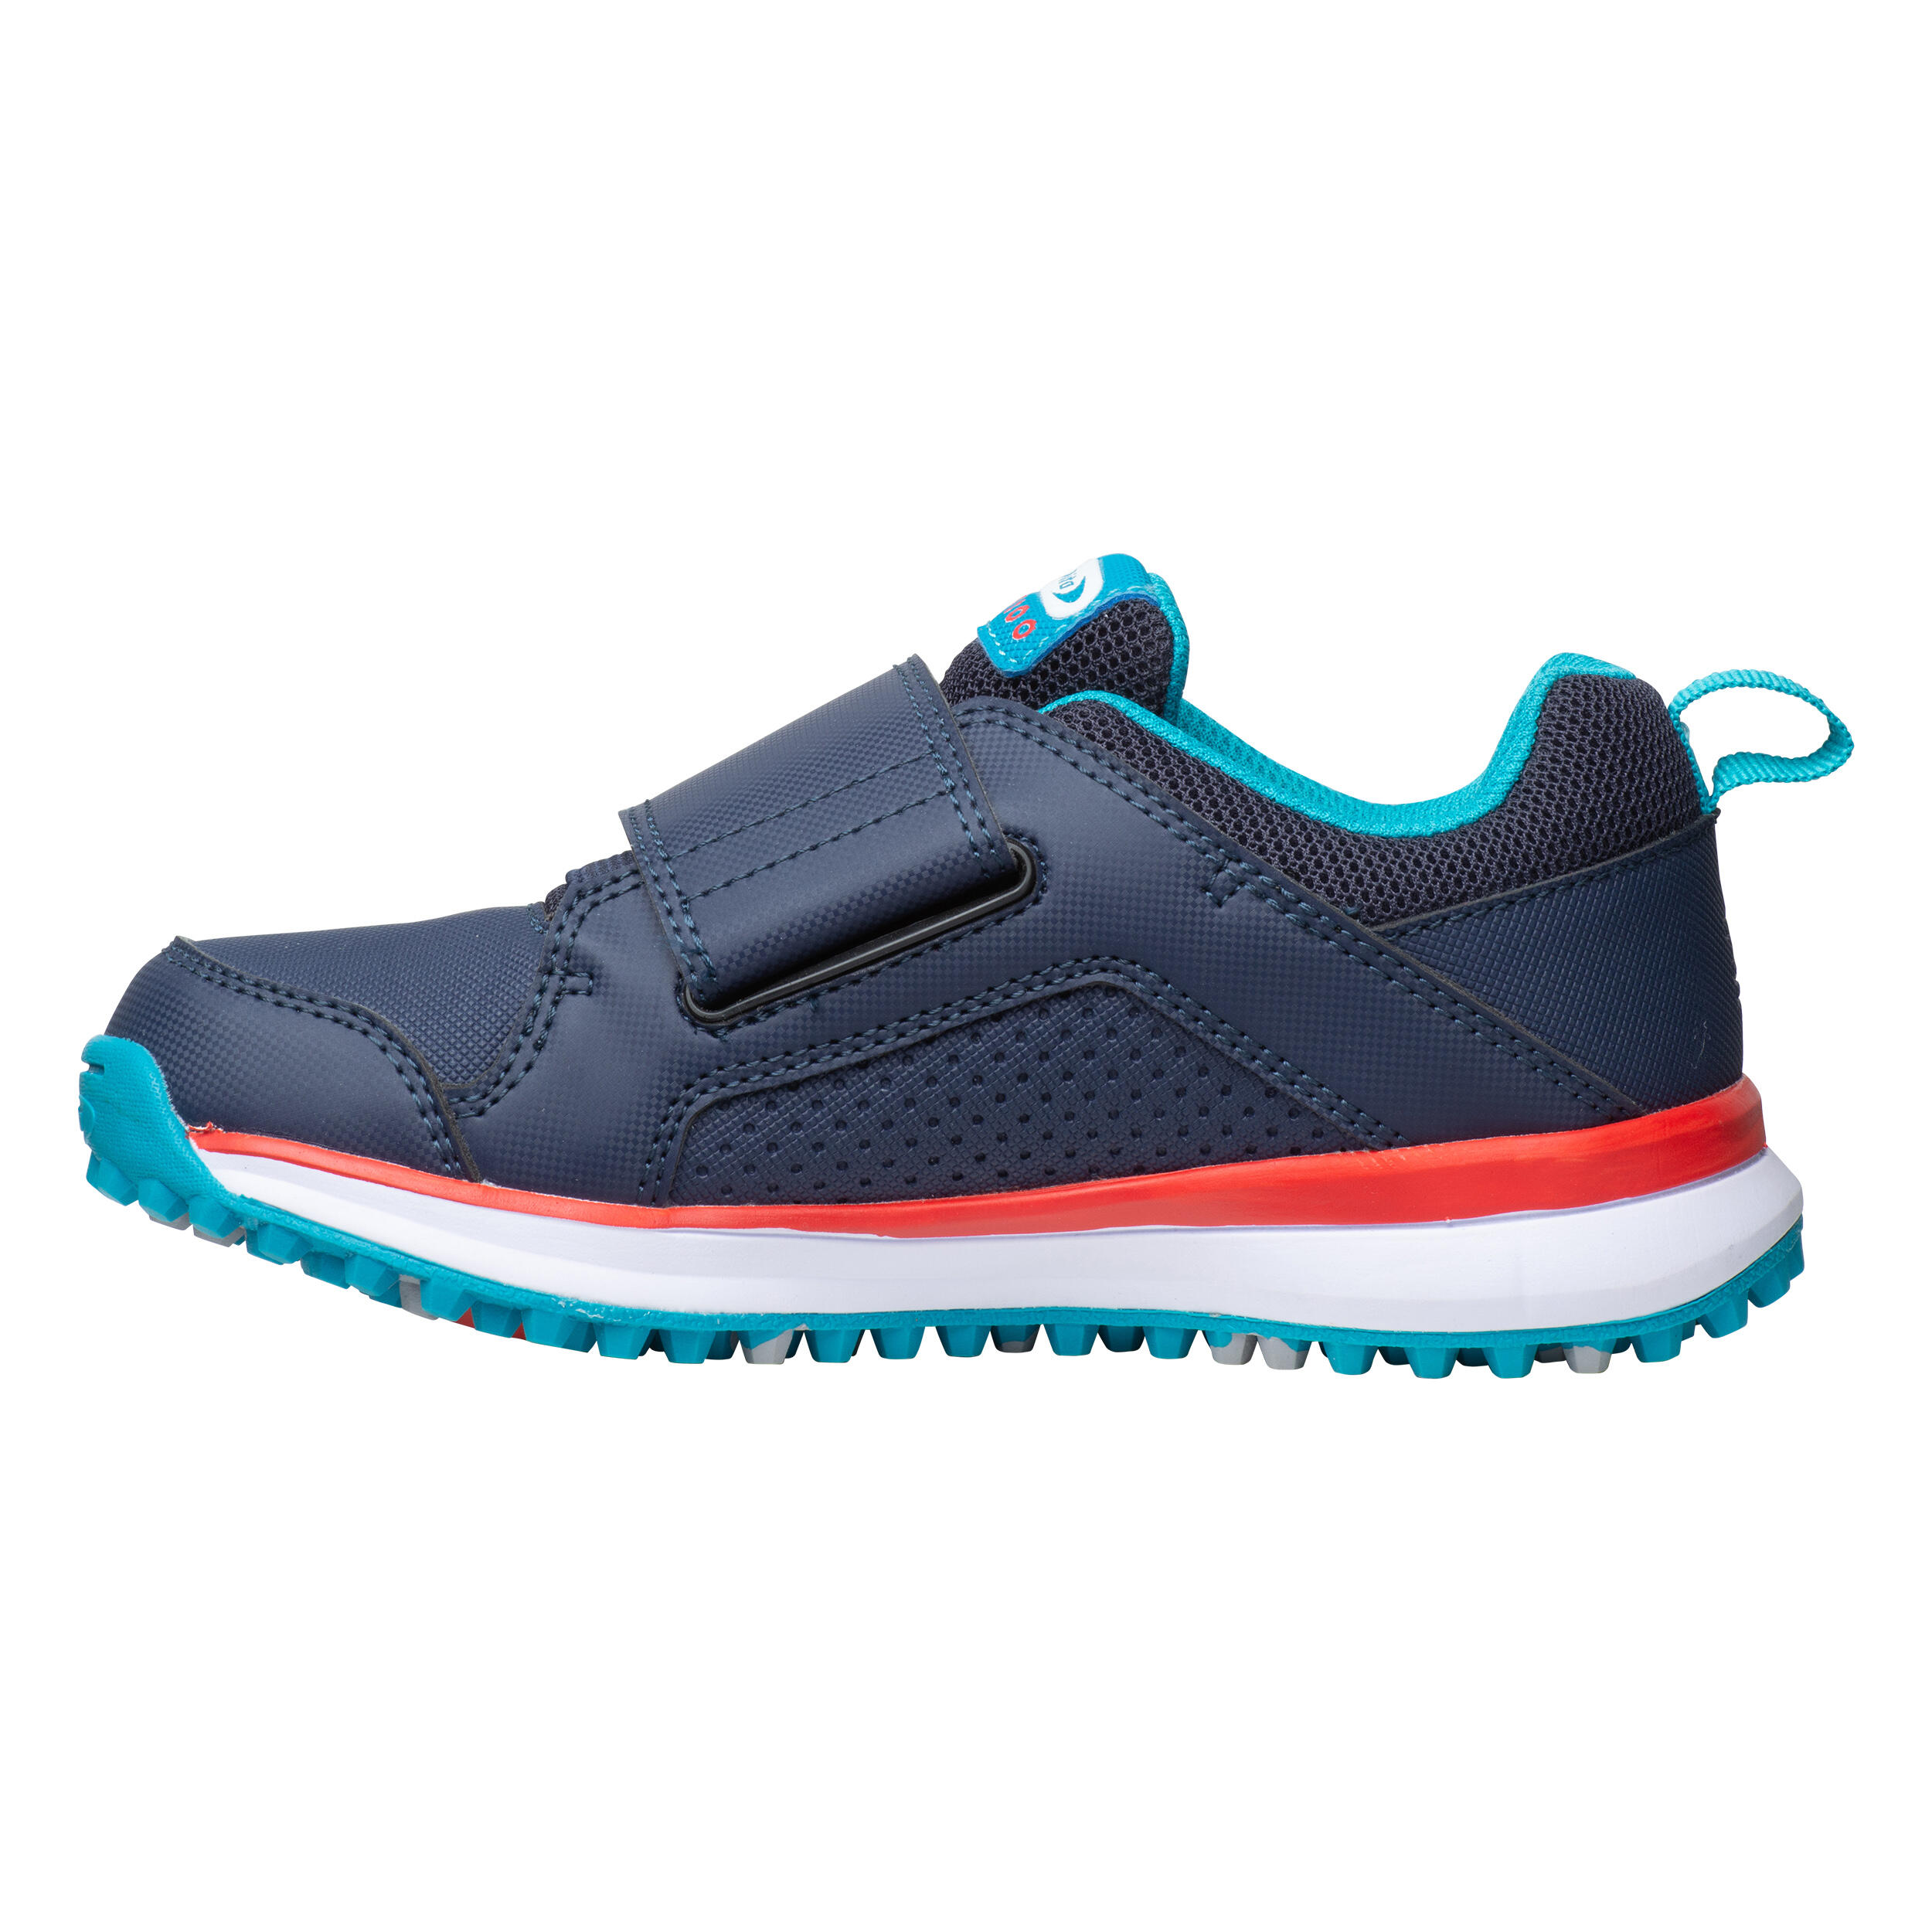 Kids' Low-Intensity Field Hockey Shoes DT100 Fix And Go - Blue 2/9